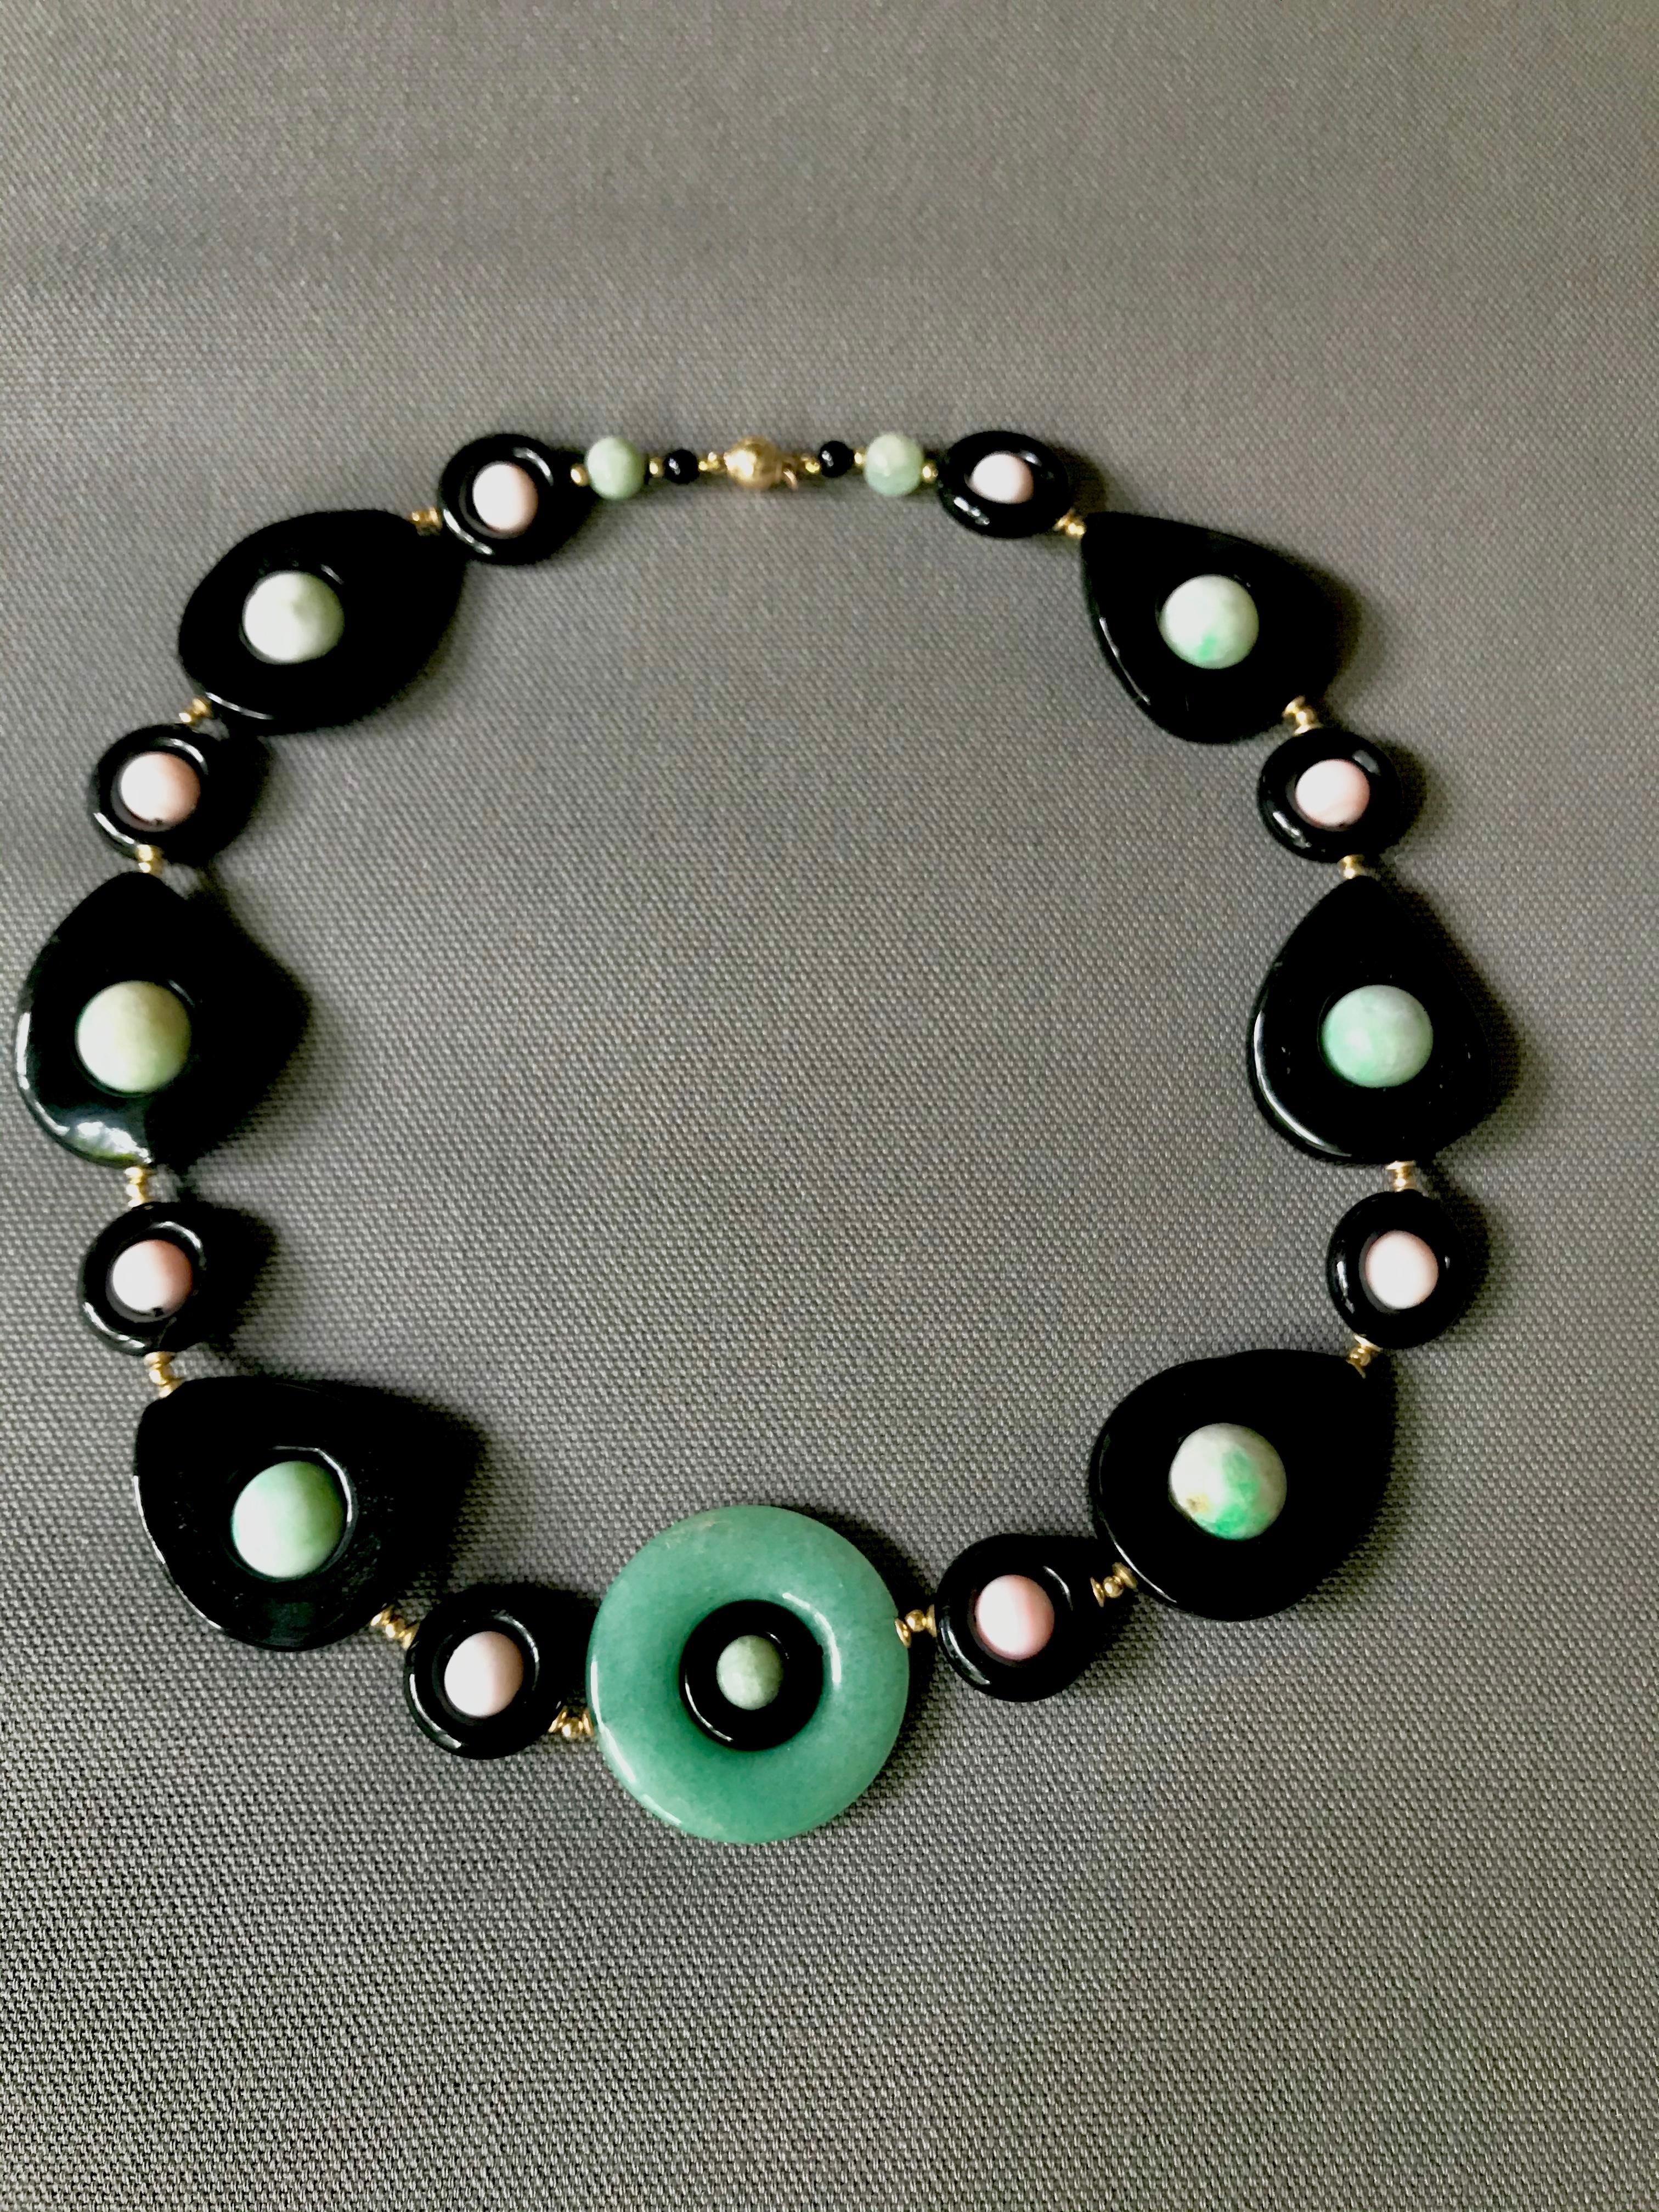 Marina J.'s unique art deco style necklace features a variety of shapes :onyx  spheres, pink coral round beads with inner round and outer circular Jade. . This striking piece mimics jewelry from the roaring '20s with its symmetrical design and